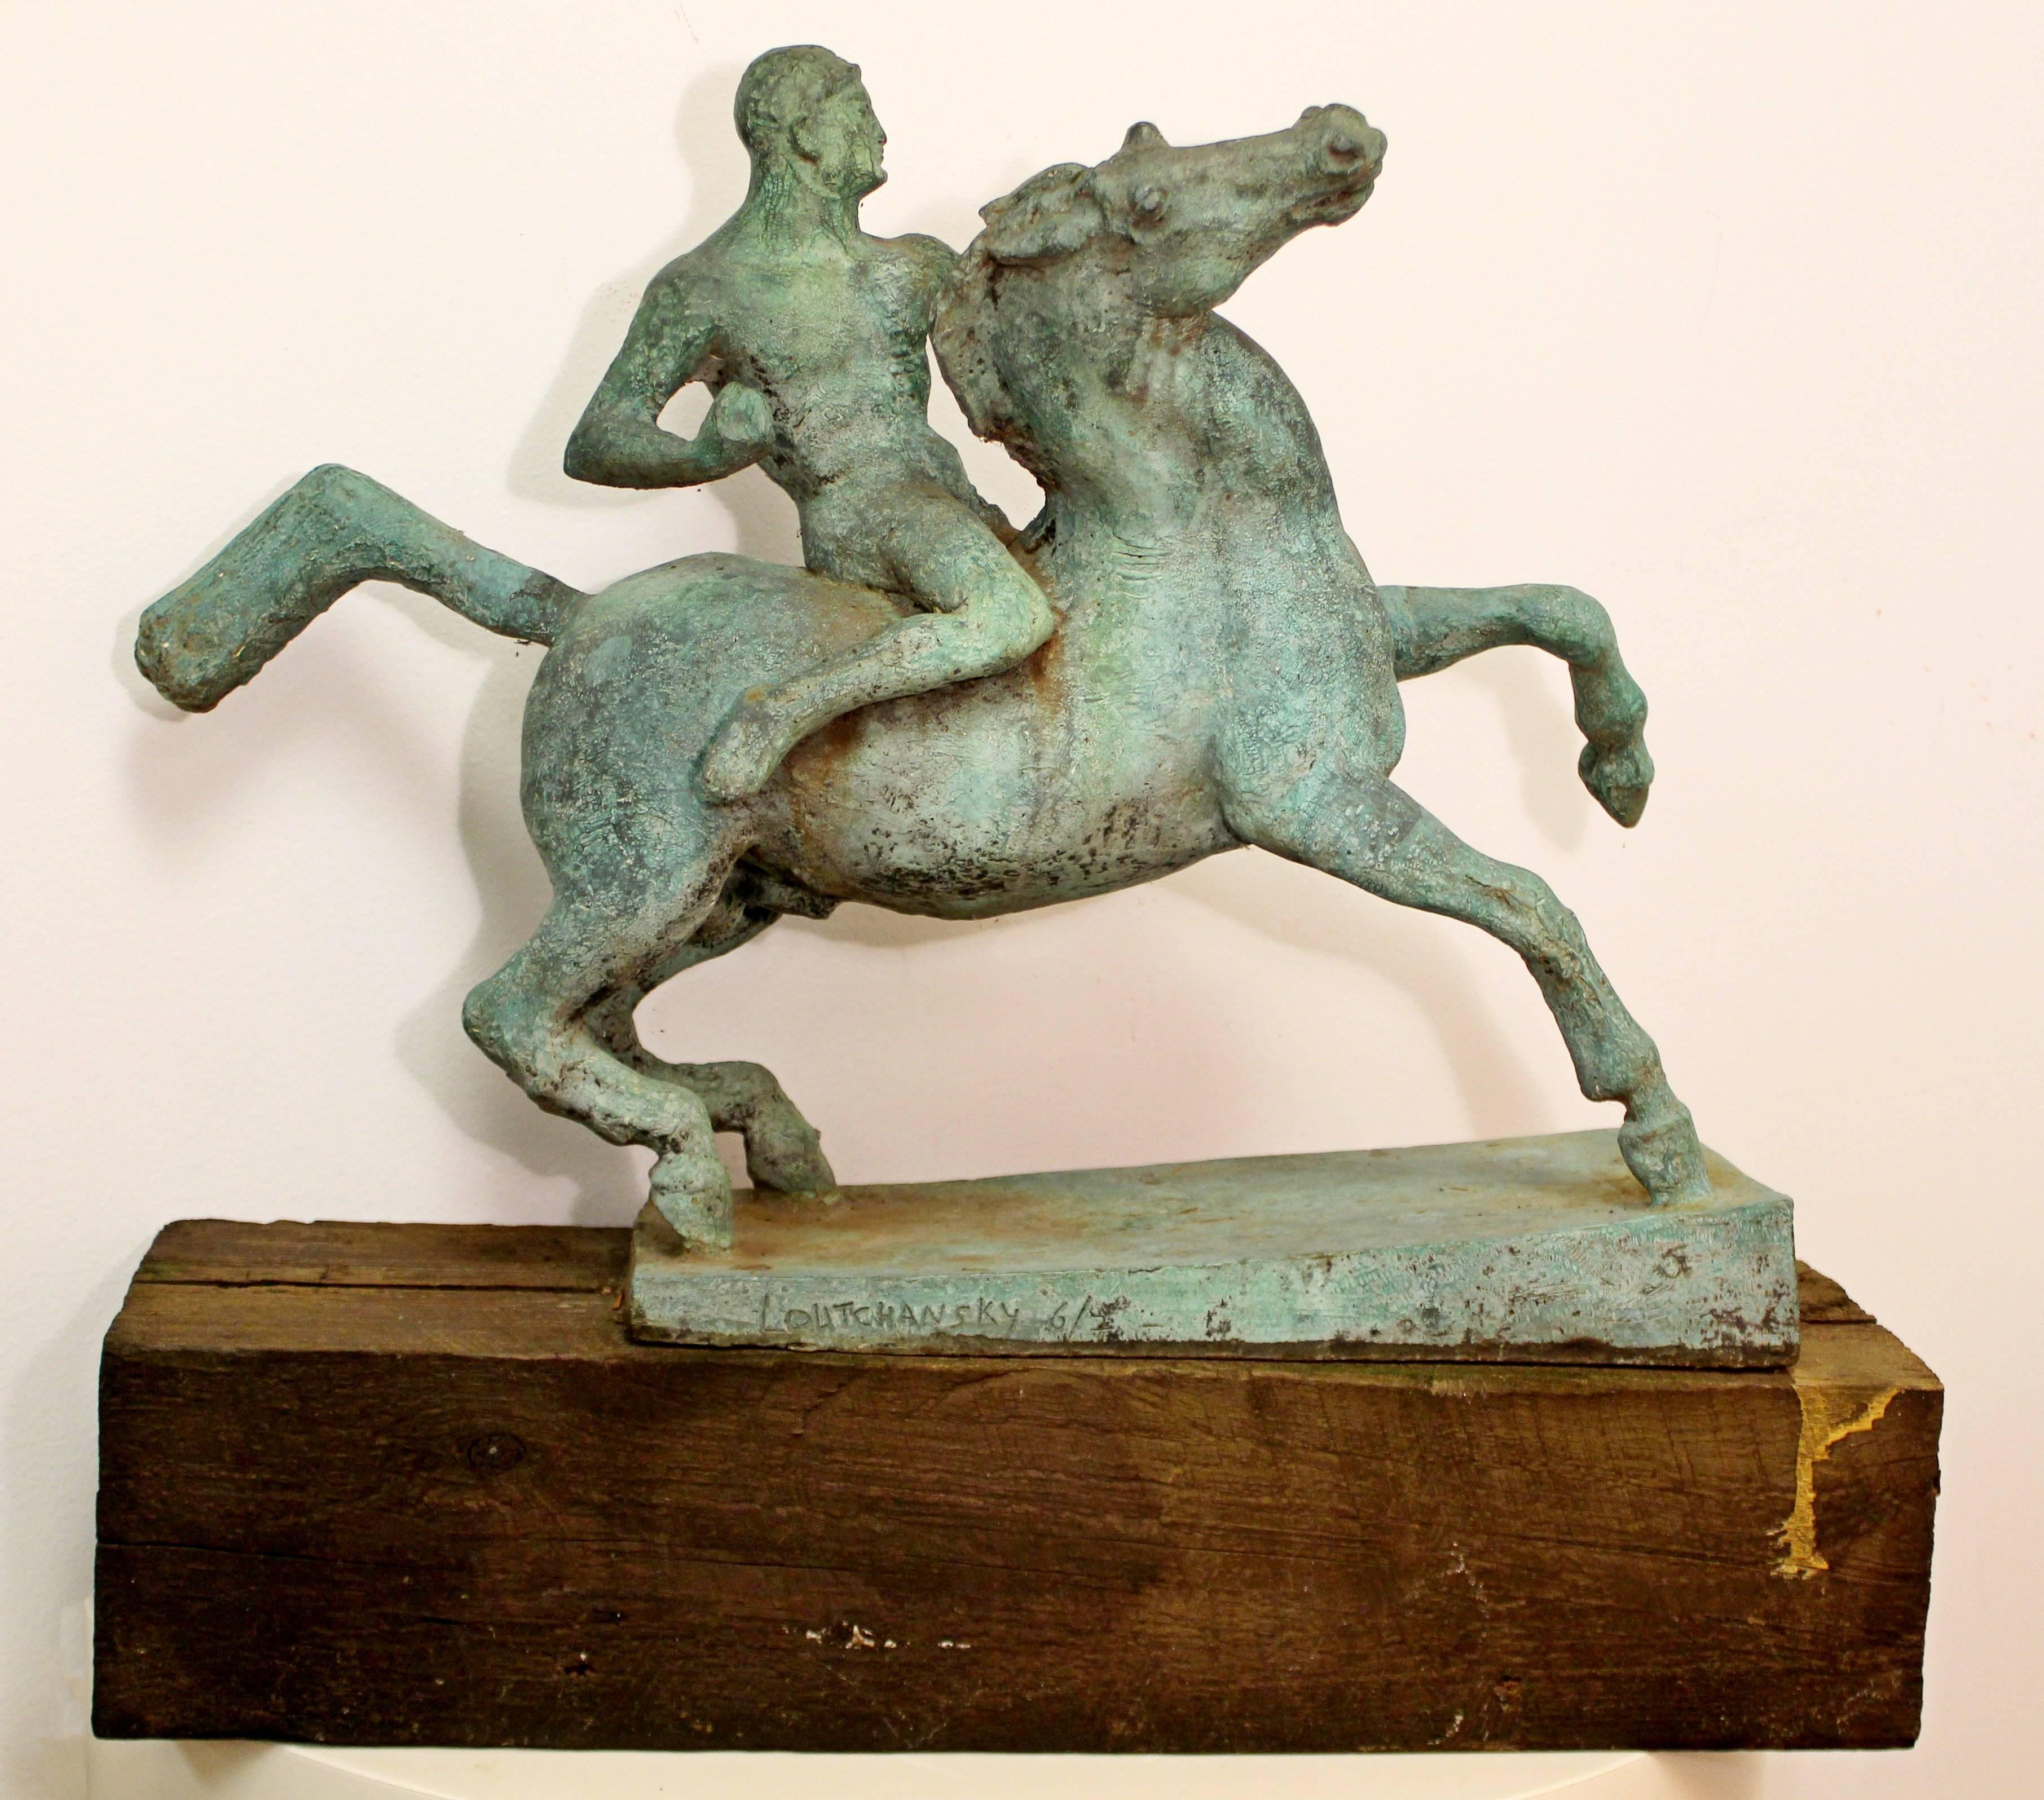 For your consideration is a beautiful, bronze table sculpture, 